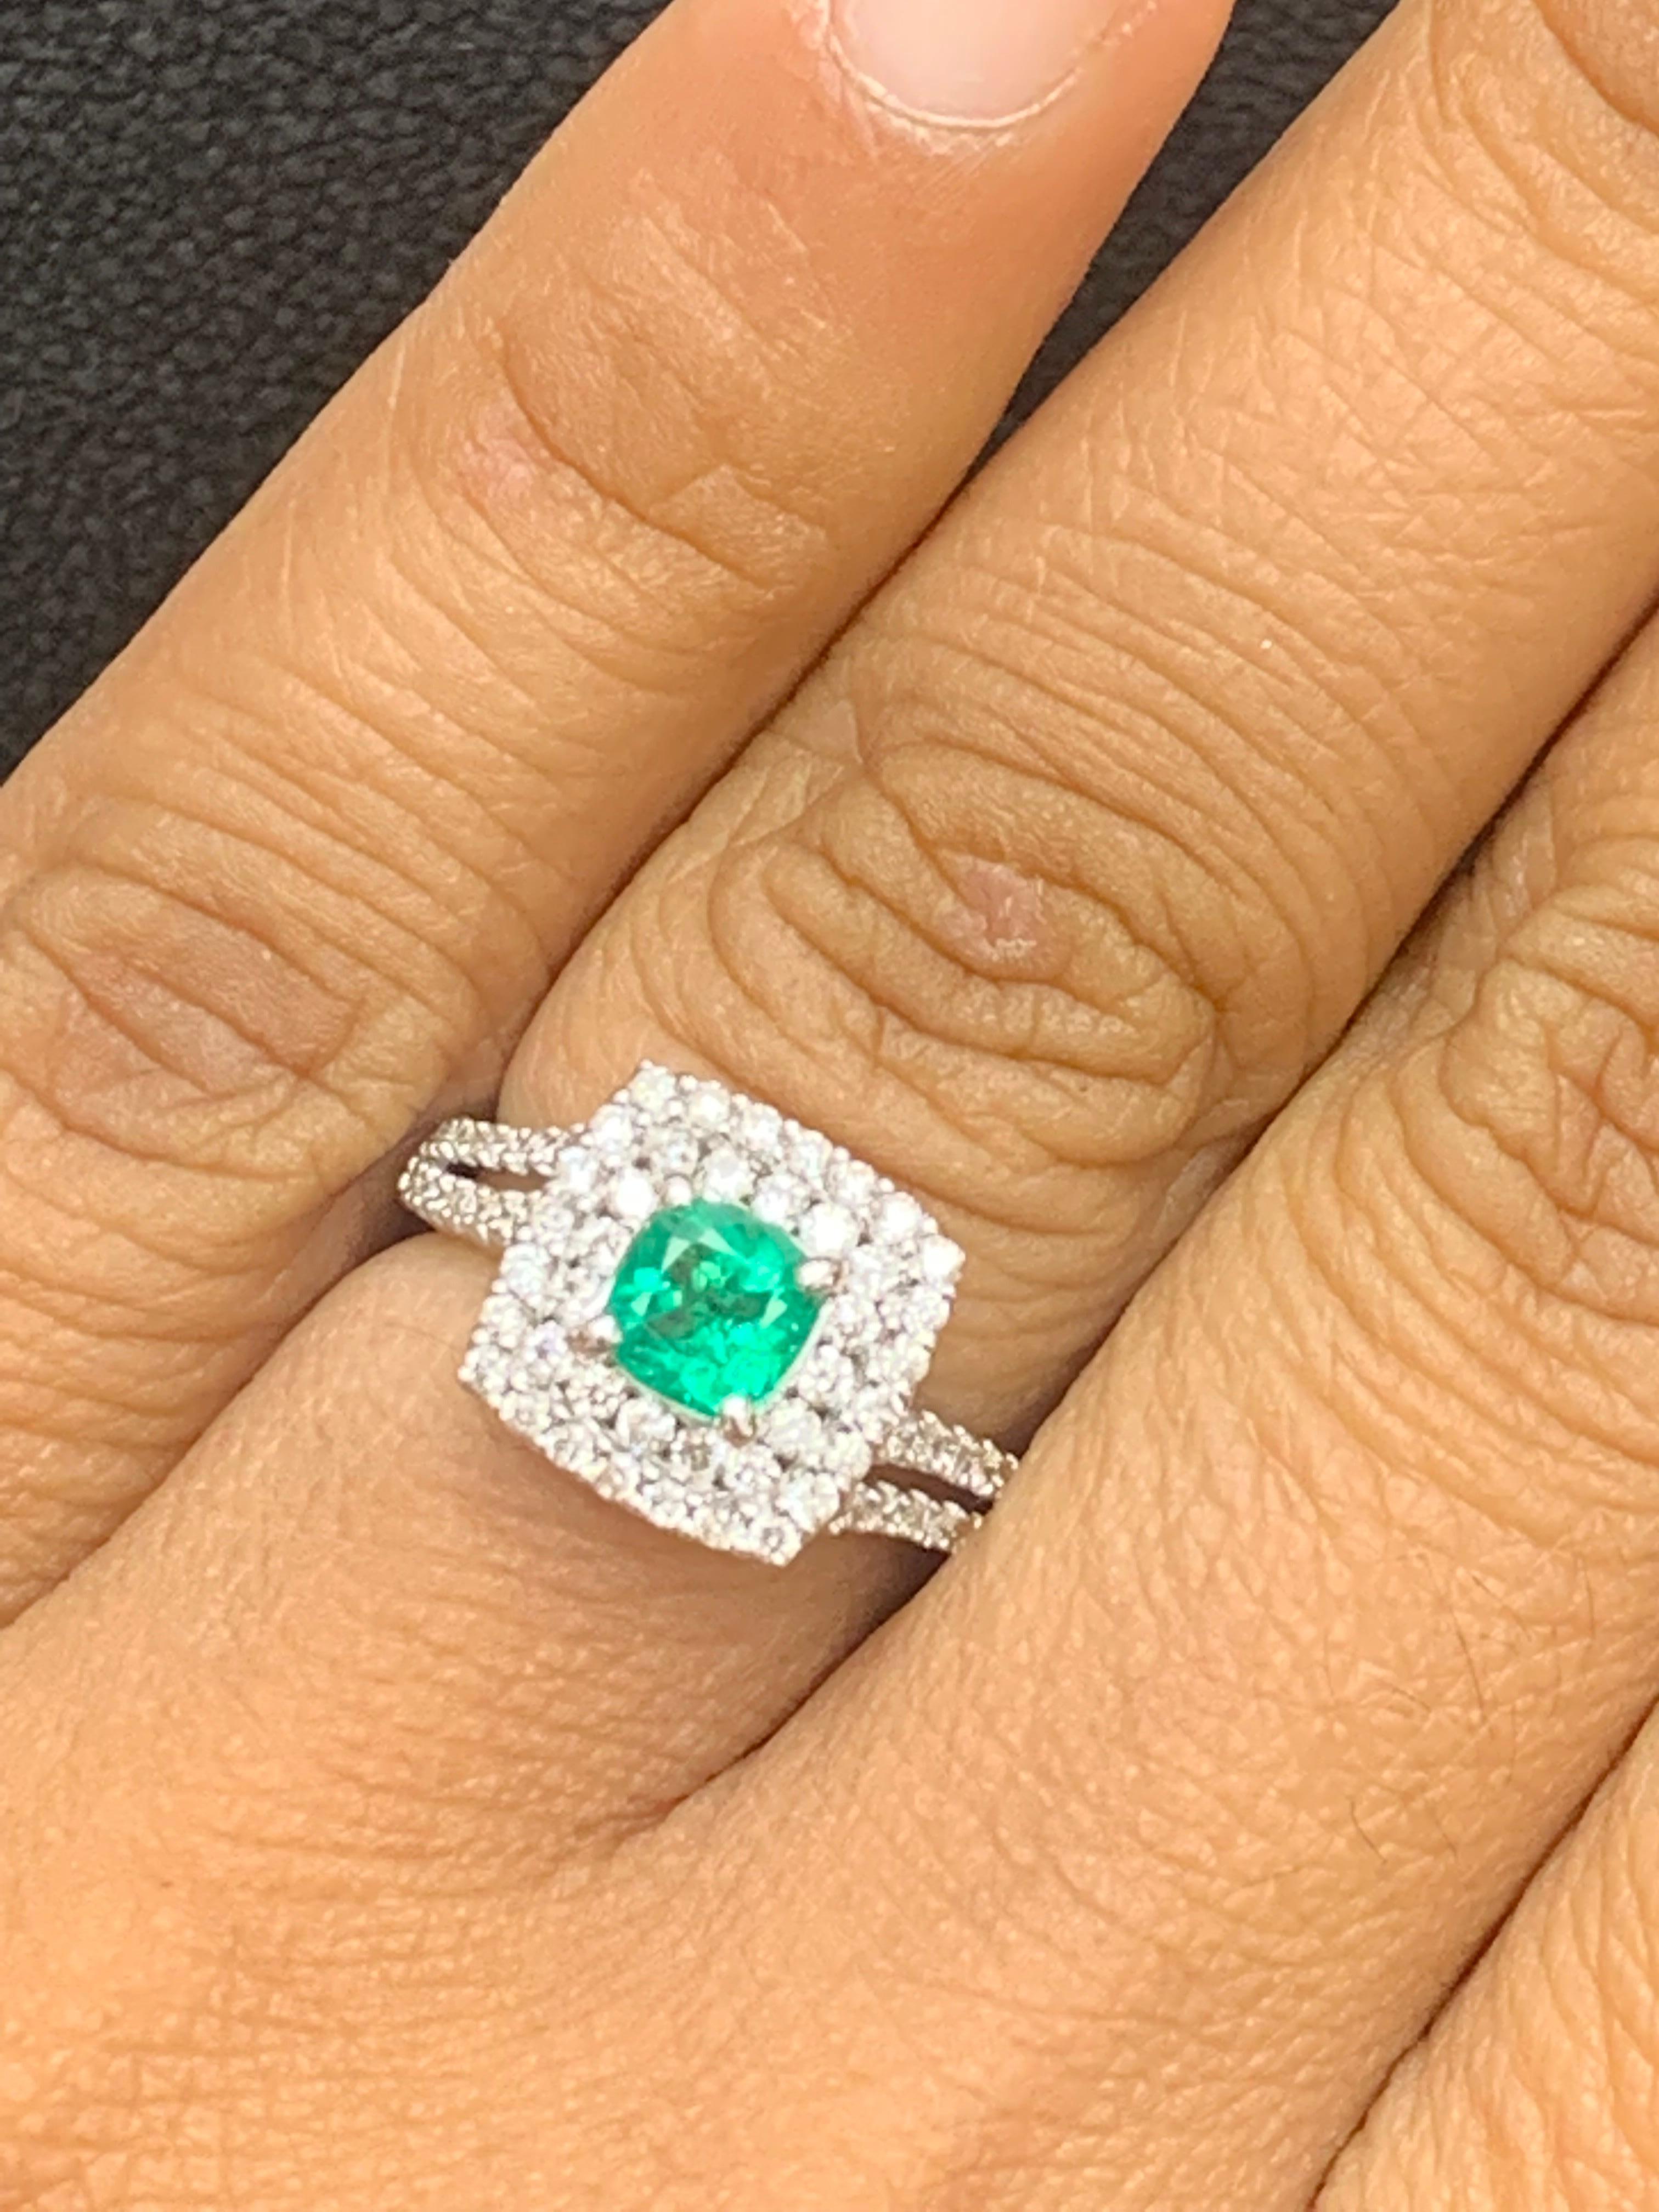 A timeless piece featuring a vibrant cushion-cut emerald weighing 0.48 carats, surrounded by a double row of round brilliant diamonds. Set in a diamond-encrusted double-row shank made in 18k white gold. 76Diamonds weigh 0.61 carats total.